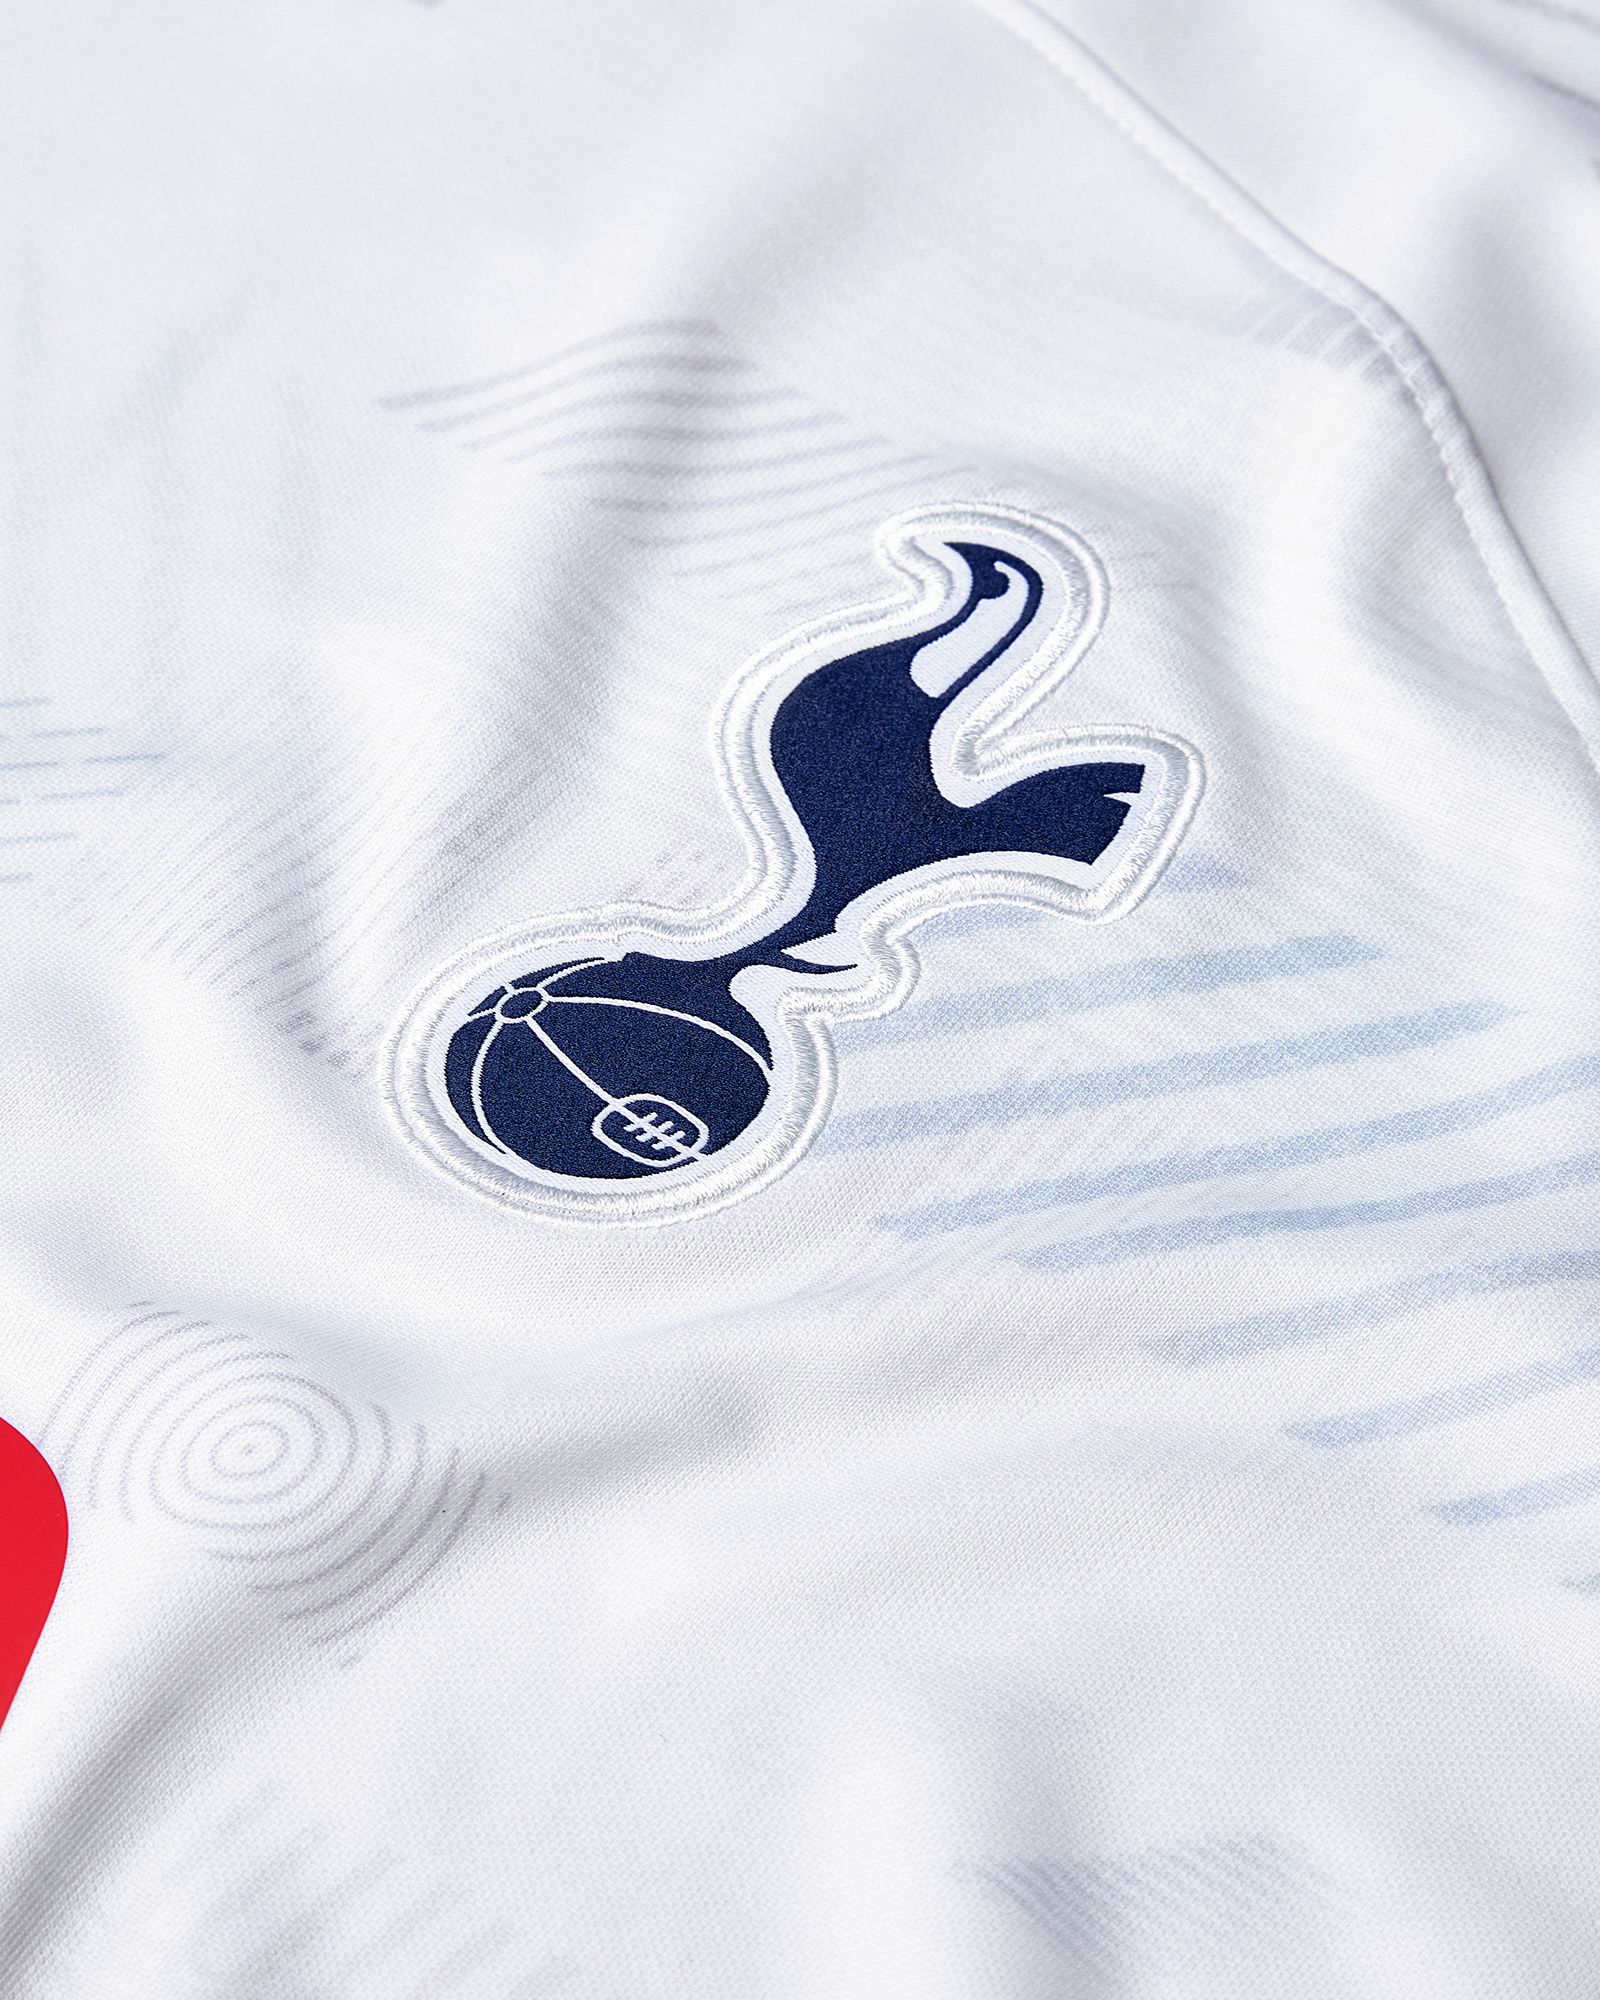 I redesigned Tottenham Hotspur kits so they actually looked GOOD… 